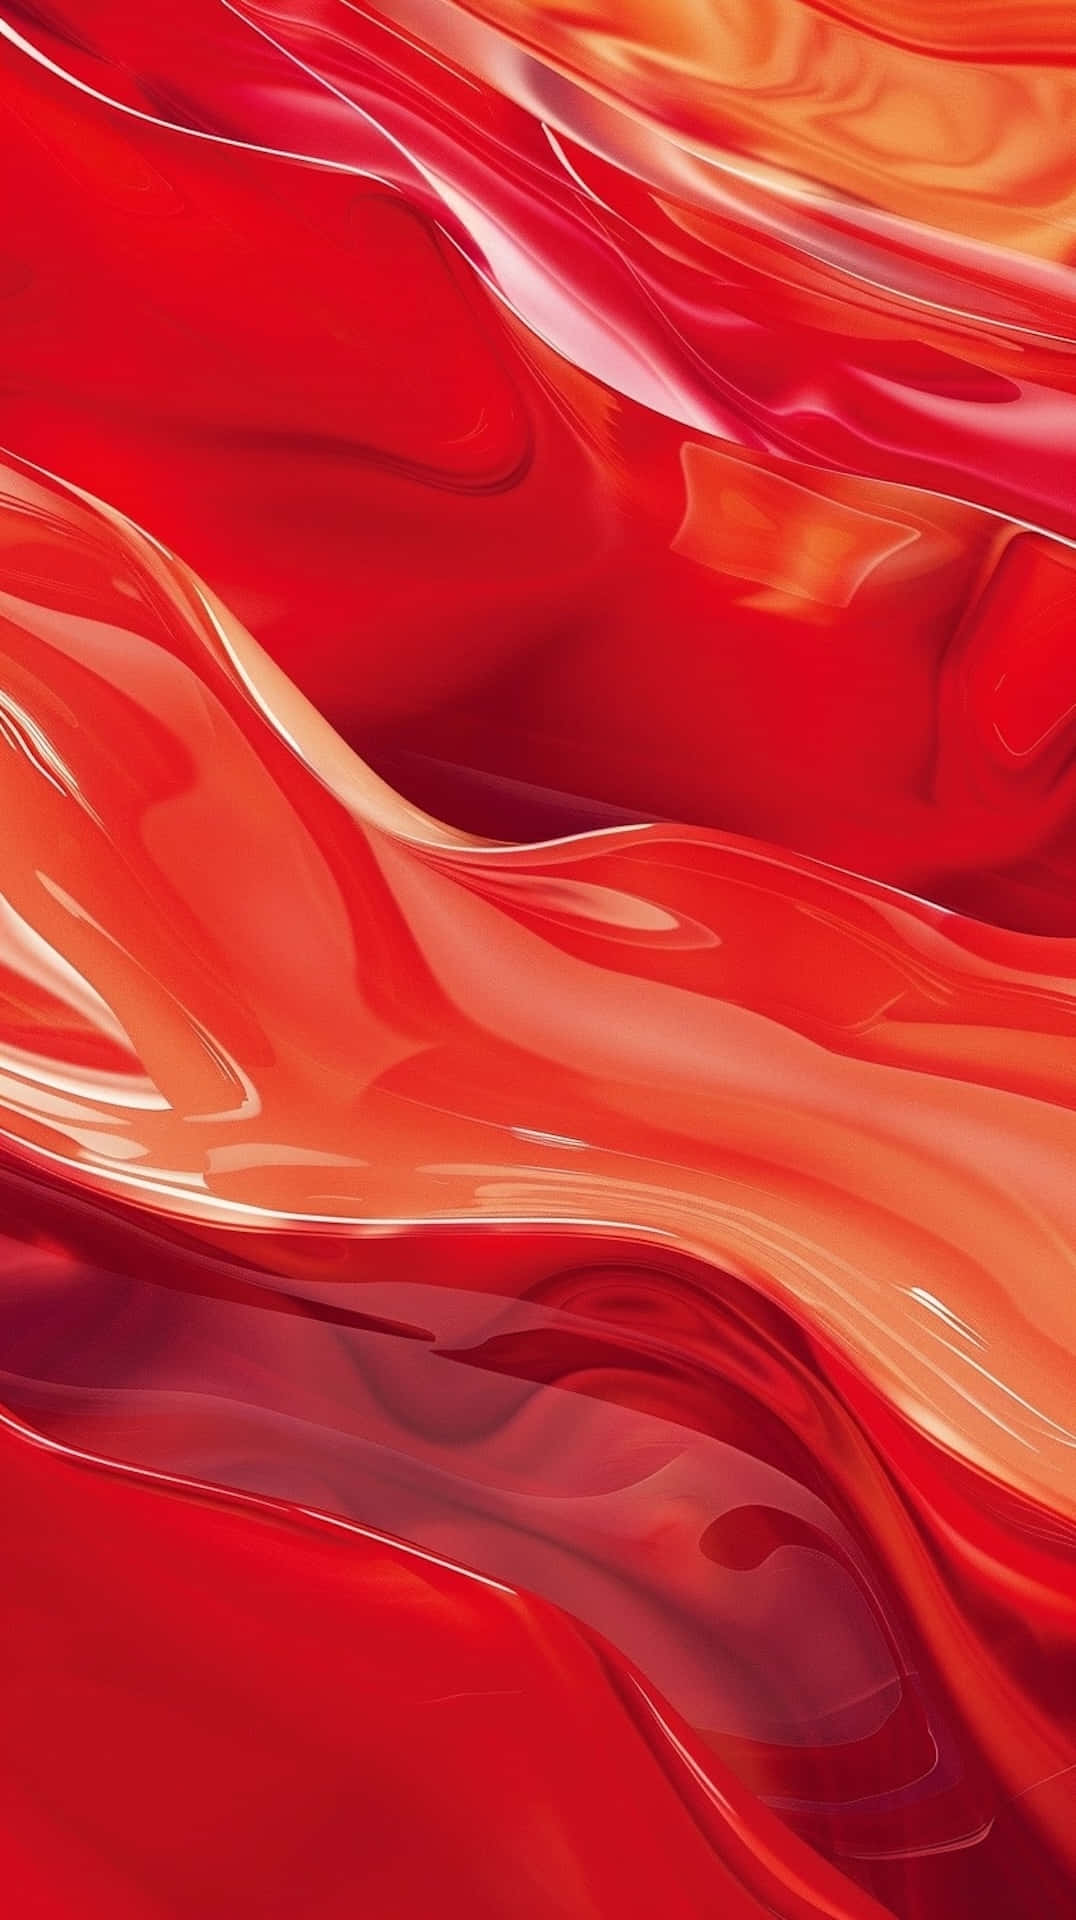 Abstract Red Waves Texture Wallpaper